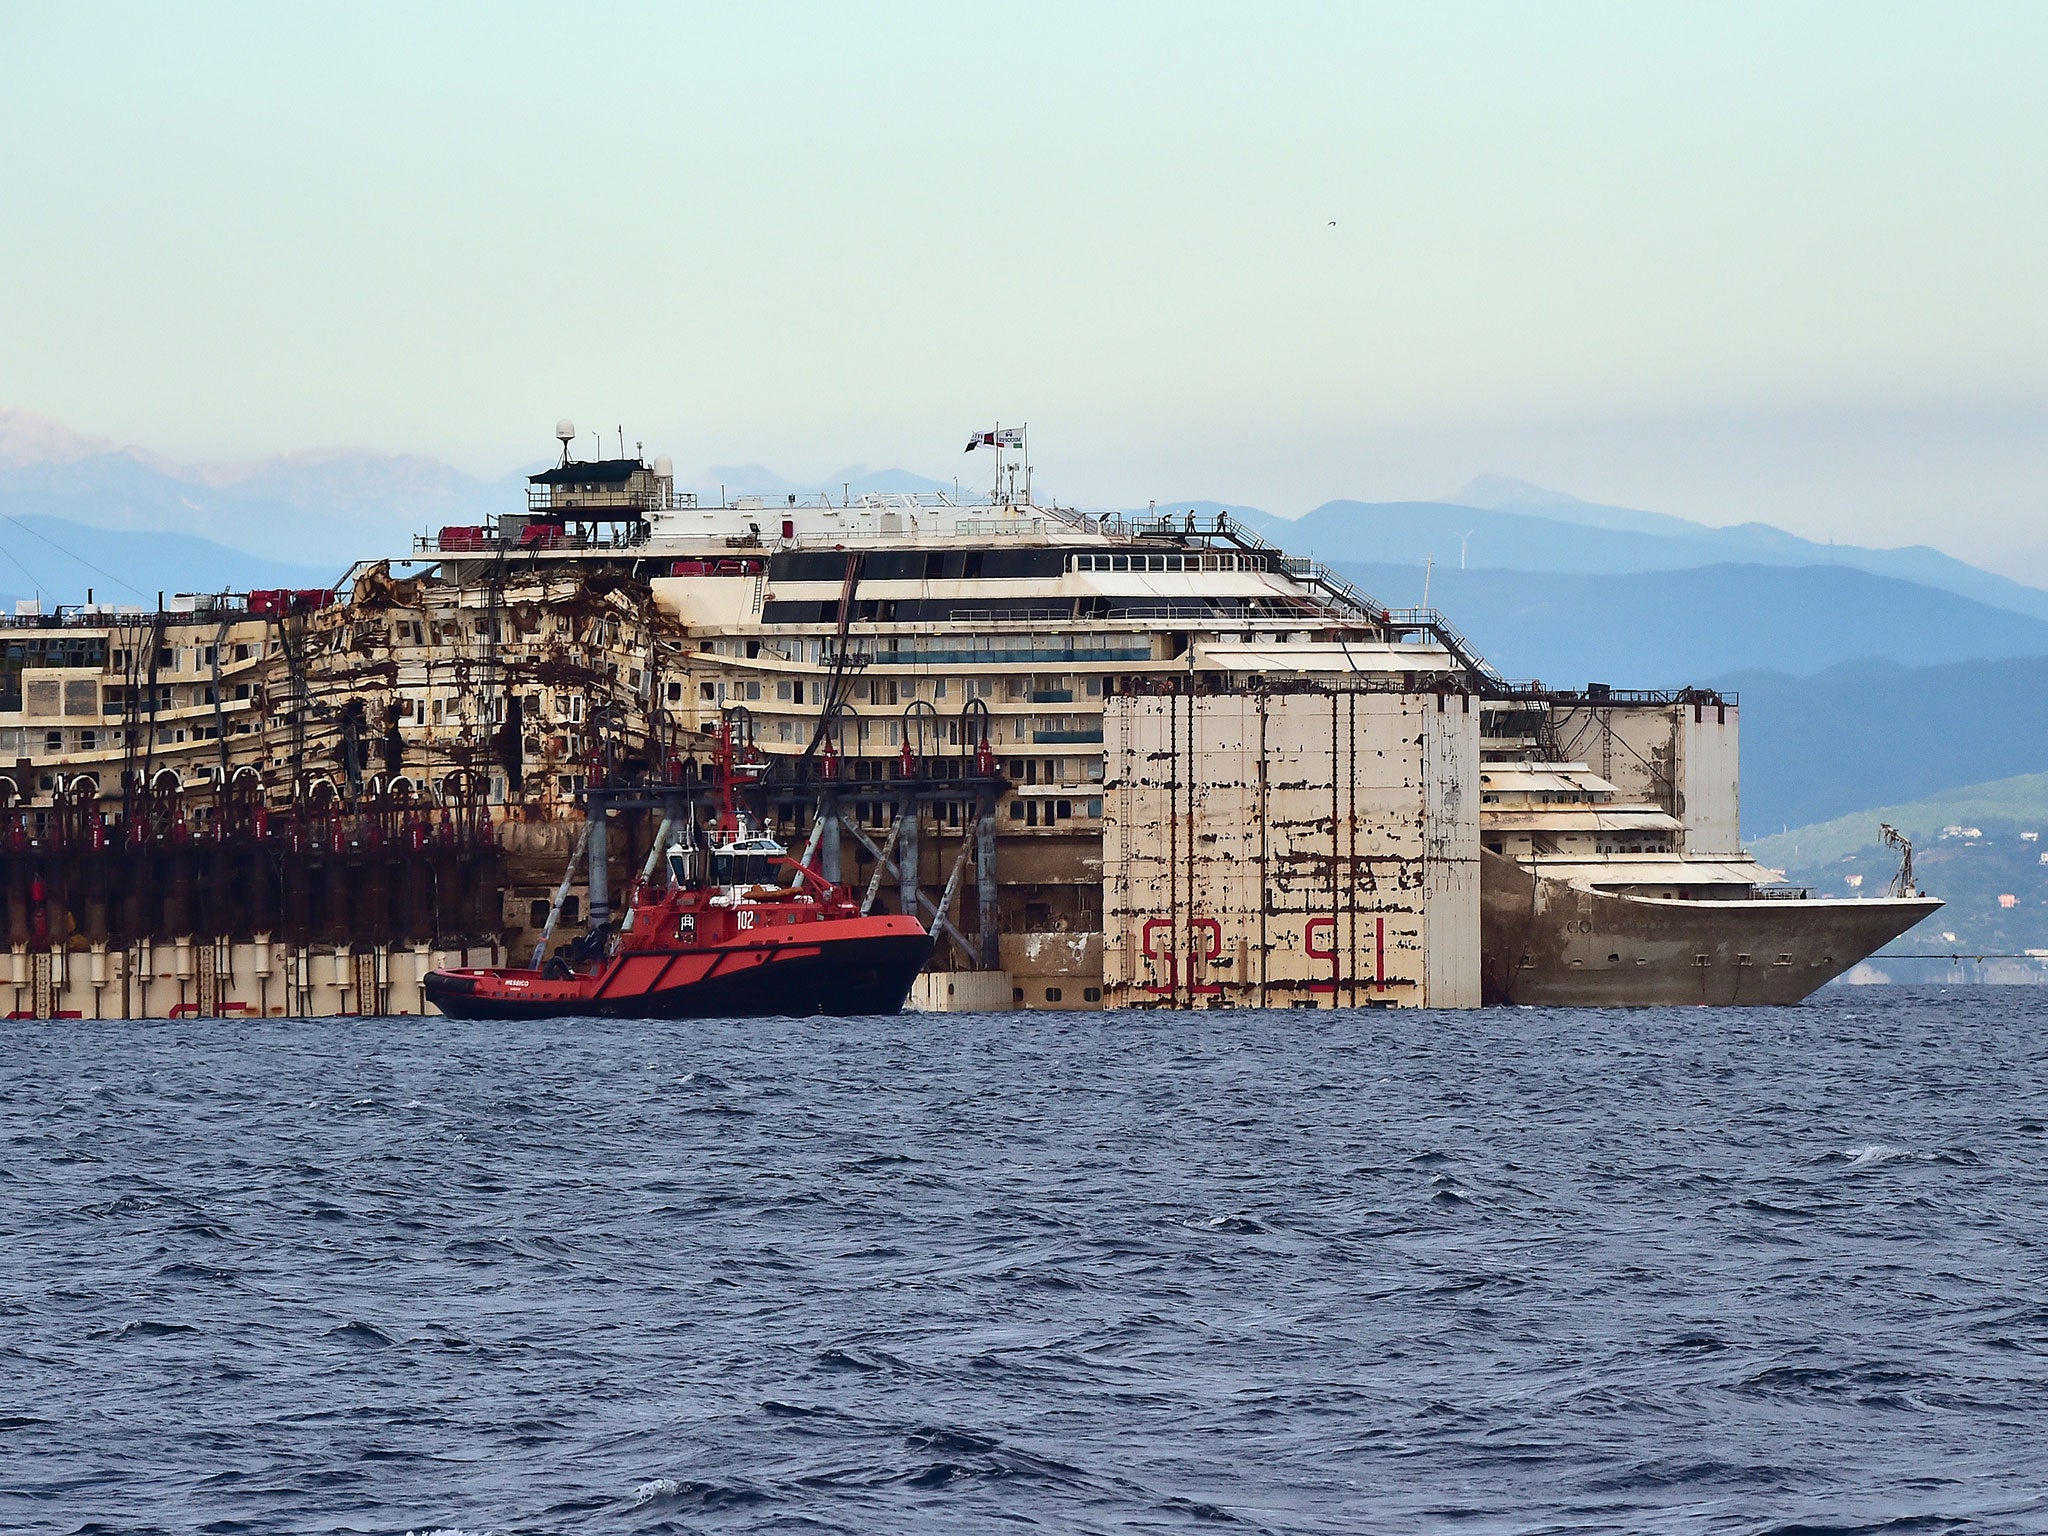 The refloated wreck of the Costa Concordia cruise ship is being dragged to the harbor of Pra di Voltri near Genoa